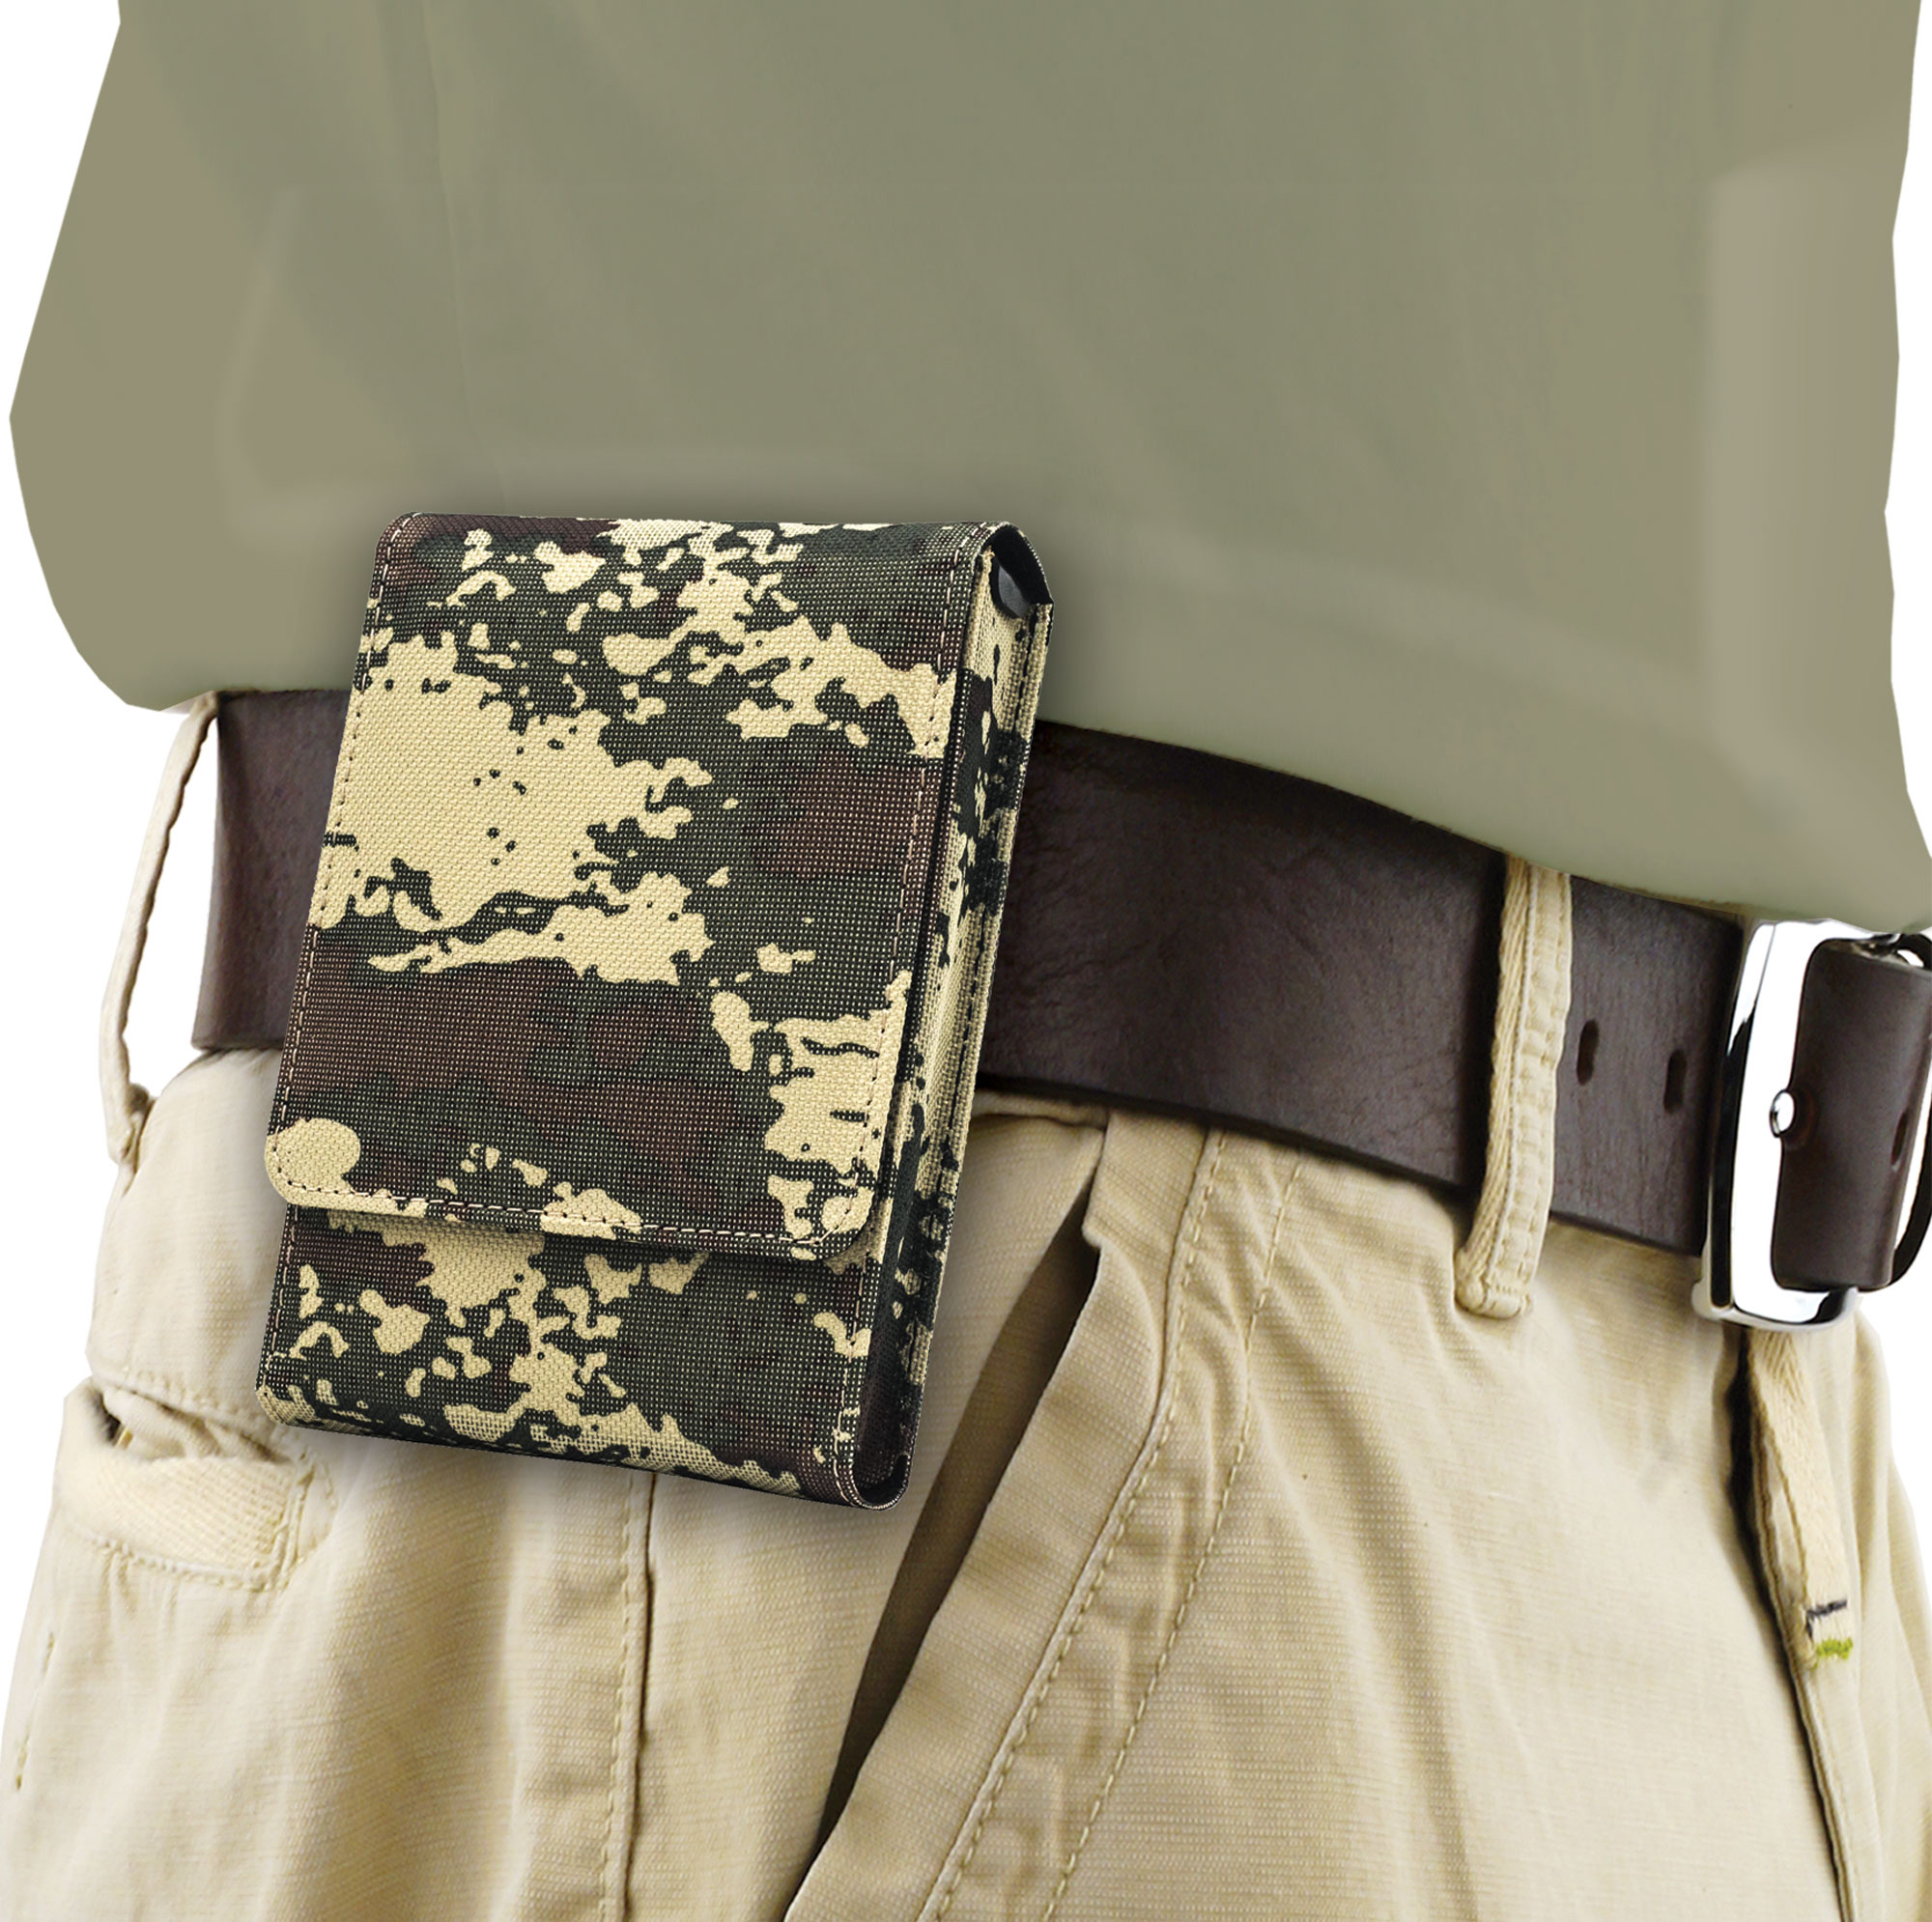 Sneaky Pete Concealed Carry Belt Holster